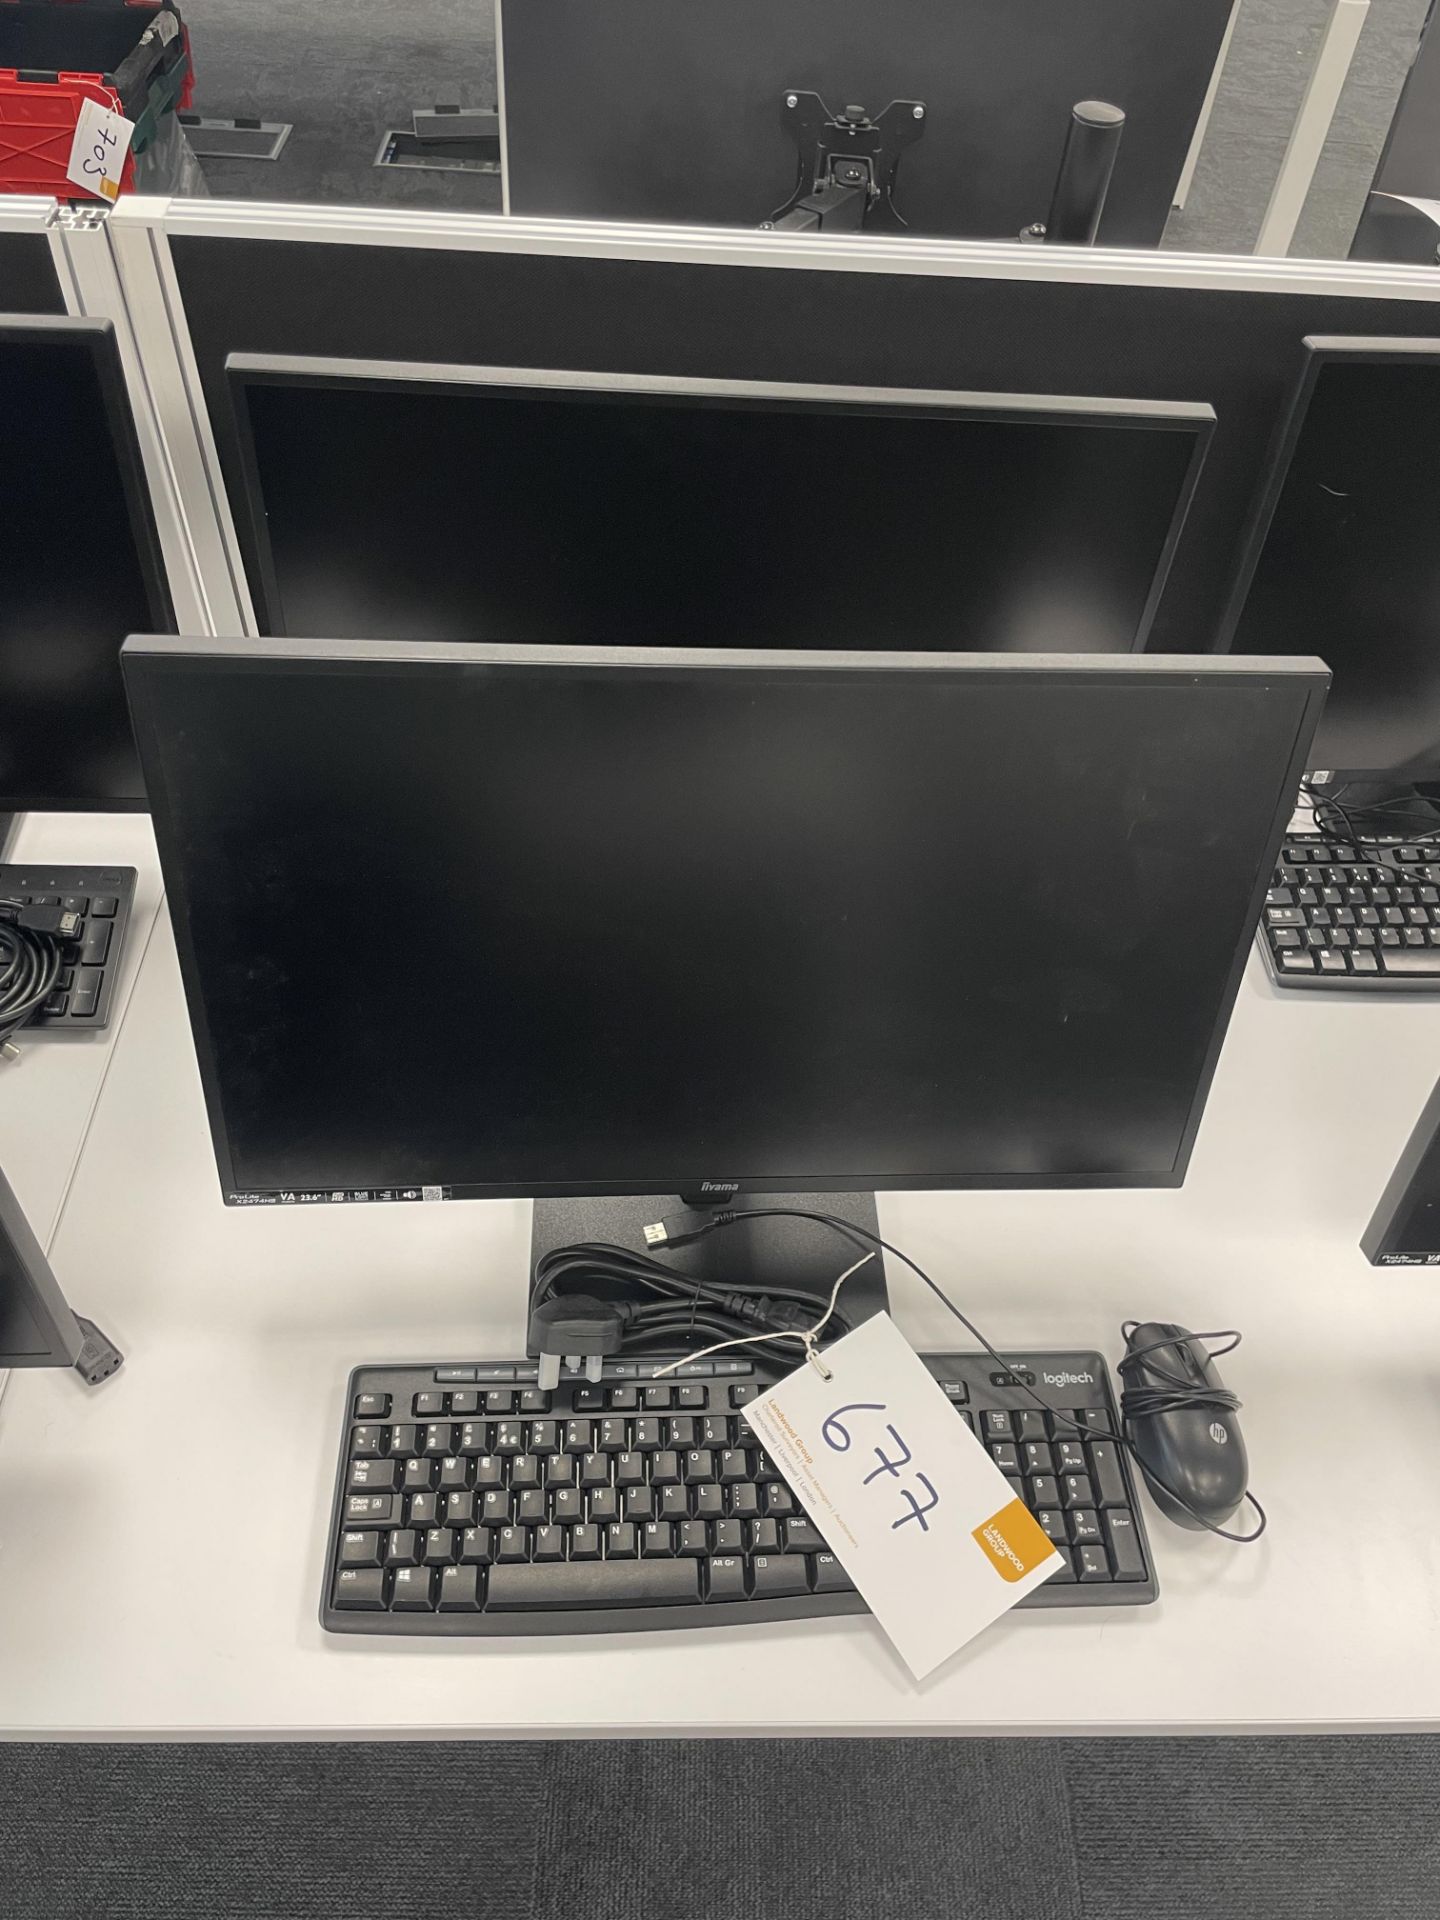 2 iiyama ProLite X2474HS monitors each with keyboard and mouse.